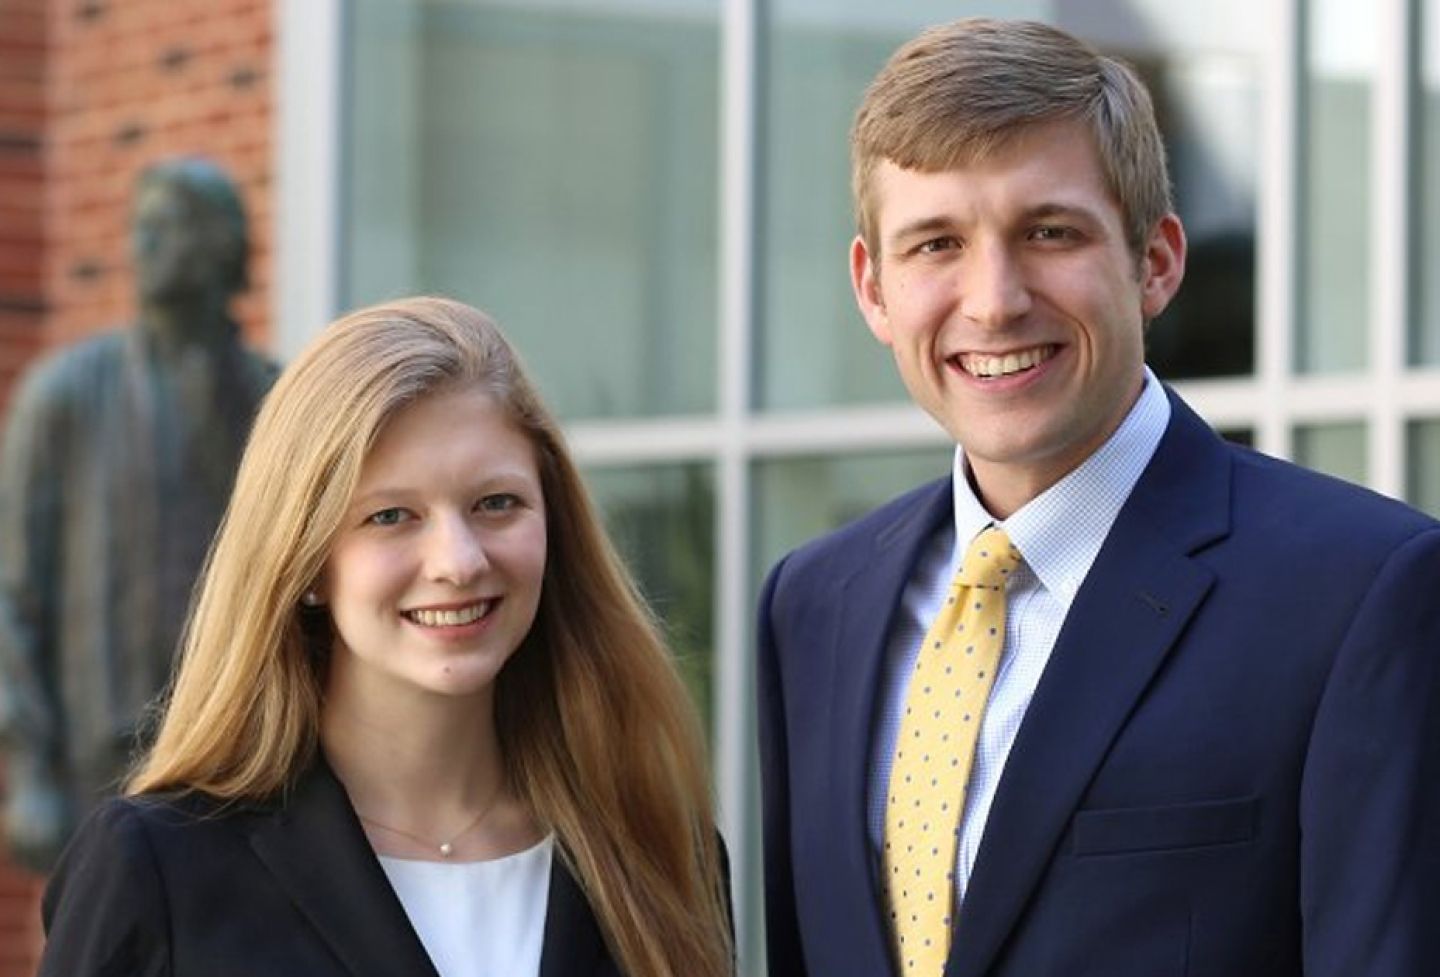 Megan Mers ’20 and Henry Dickman ’20 won the 91st William Minor Lile Moot Court Competition in October.